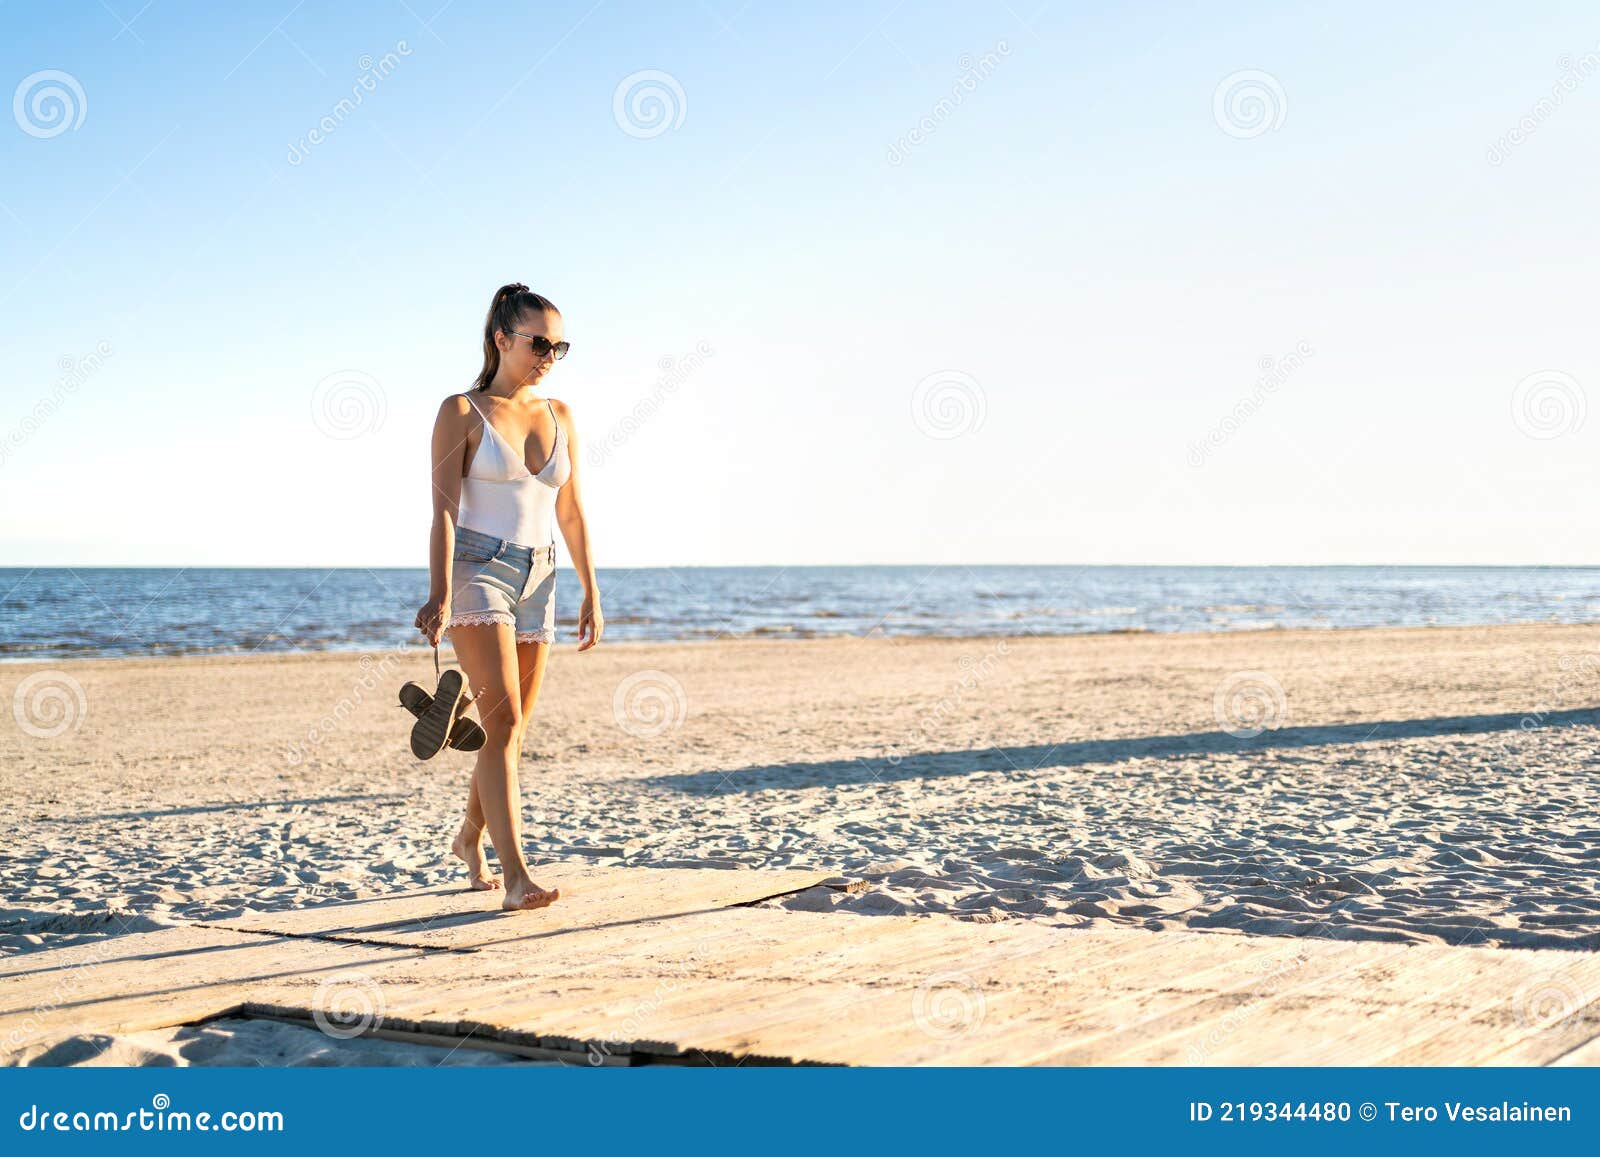 Thoughtful Lonely Woman Walking at an Empty Beach. Thinking about Life ...